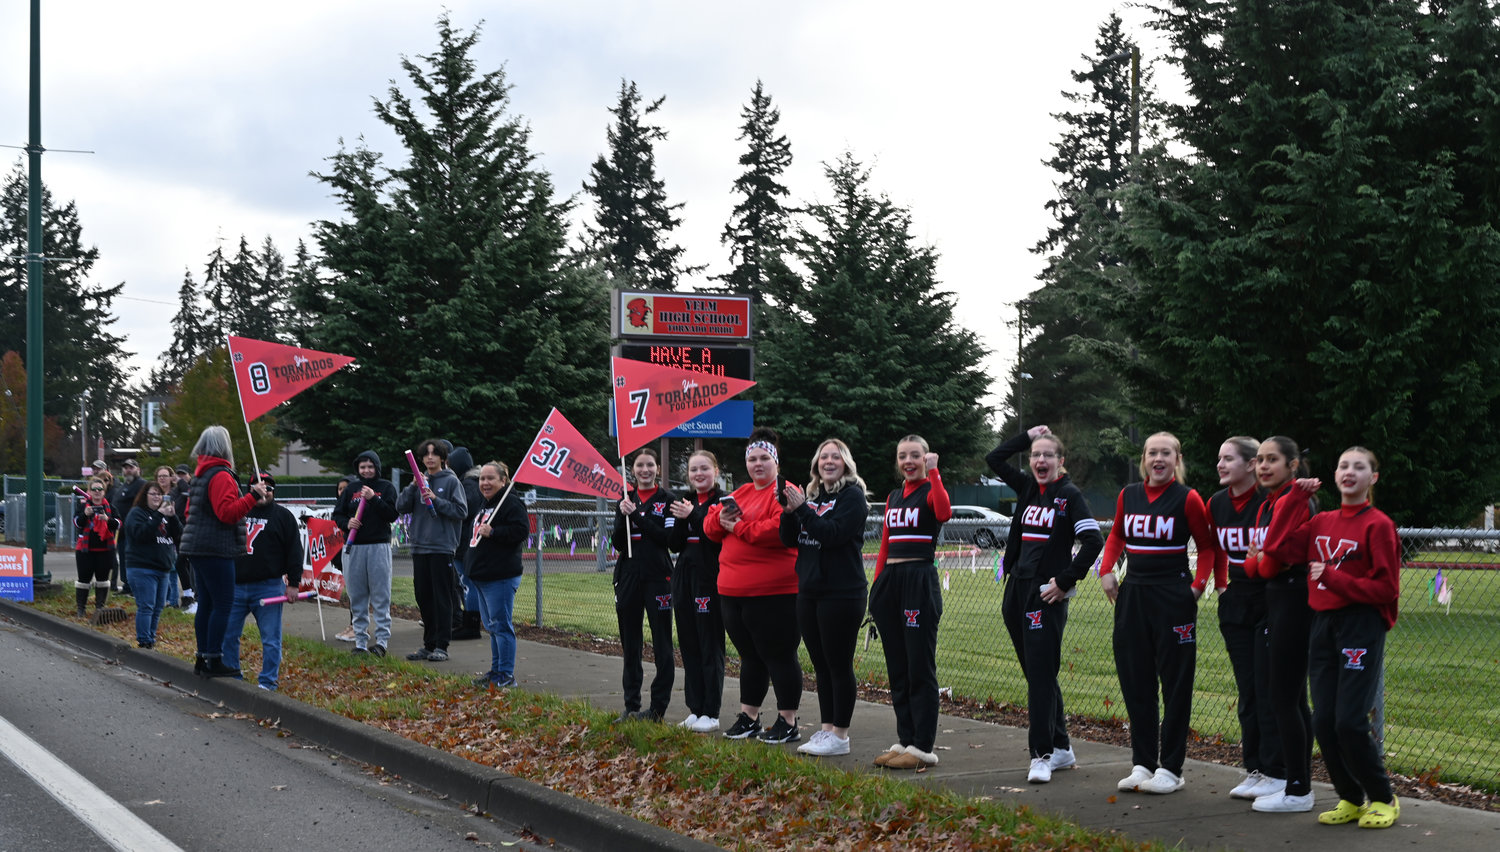 Yelm High School cheerleaders and other supporters gather outside of Yelm High School on Saturday, Nov. 26 to send the football team off to their semifinal game.